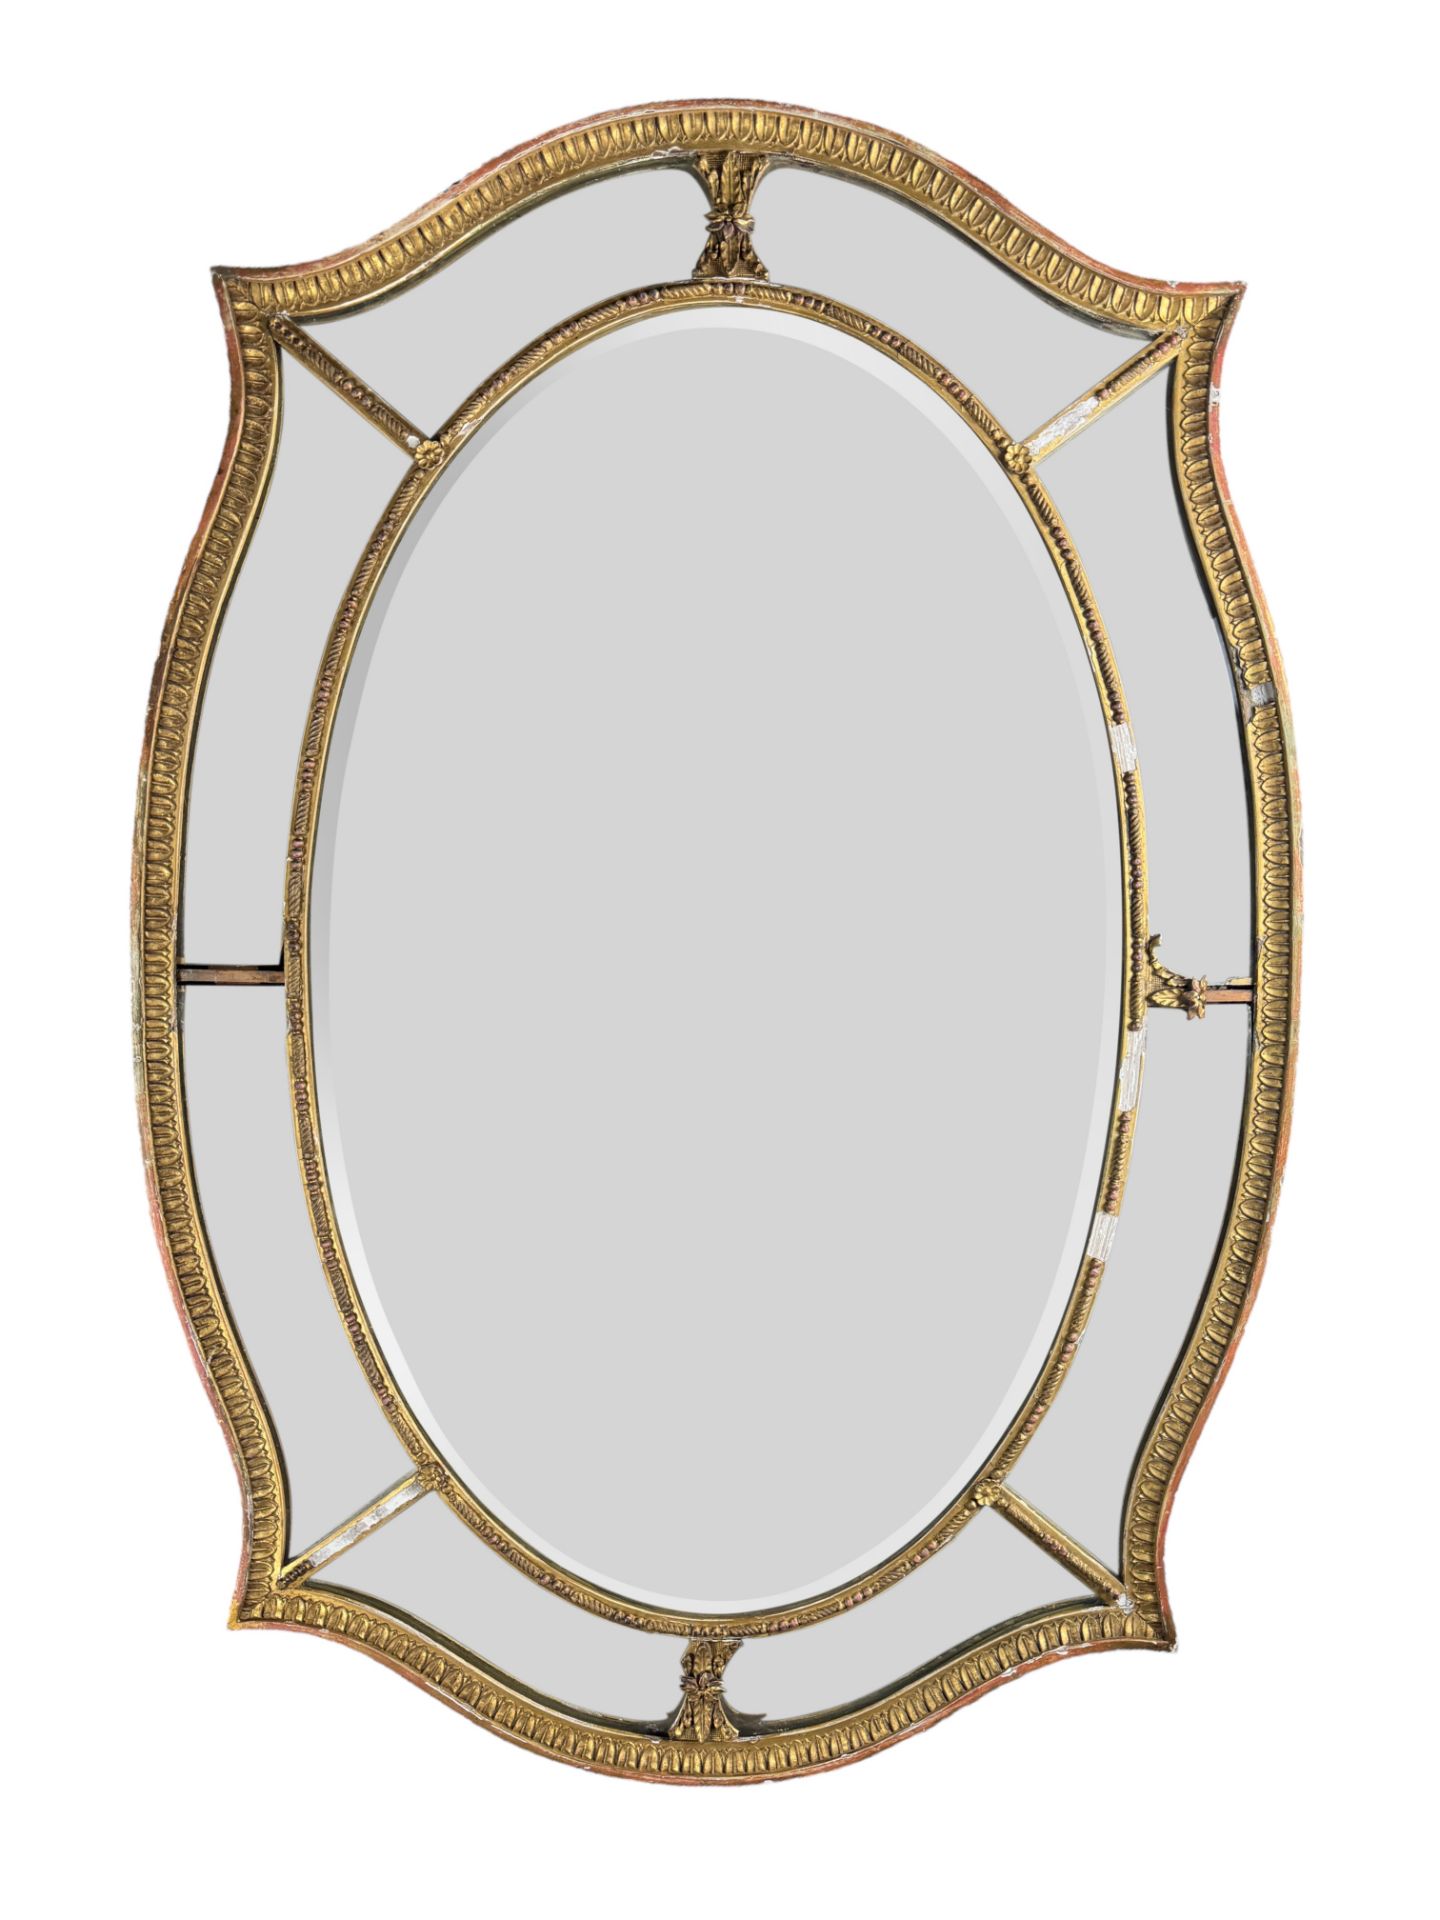 A late 19th century giltwood and composition marginal mirror